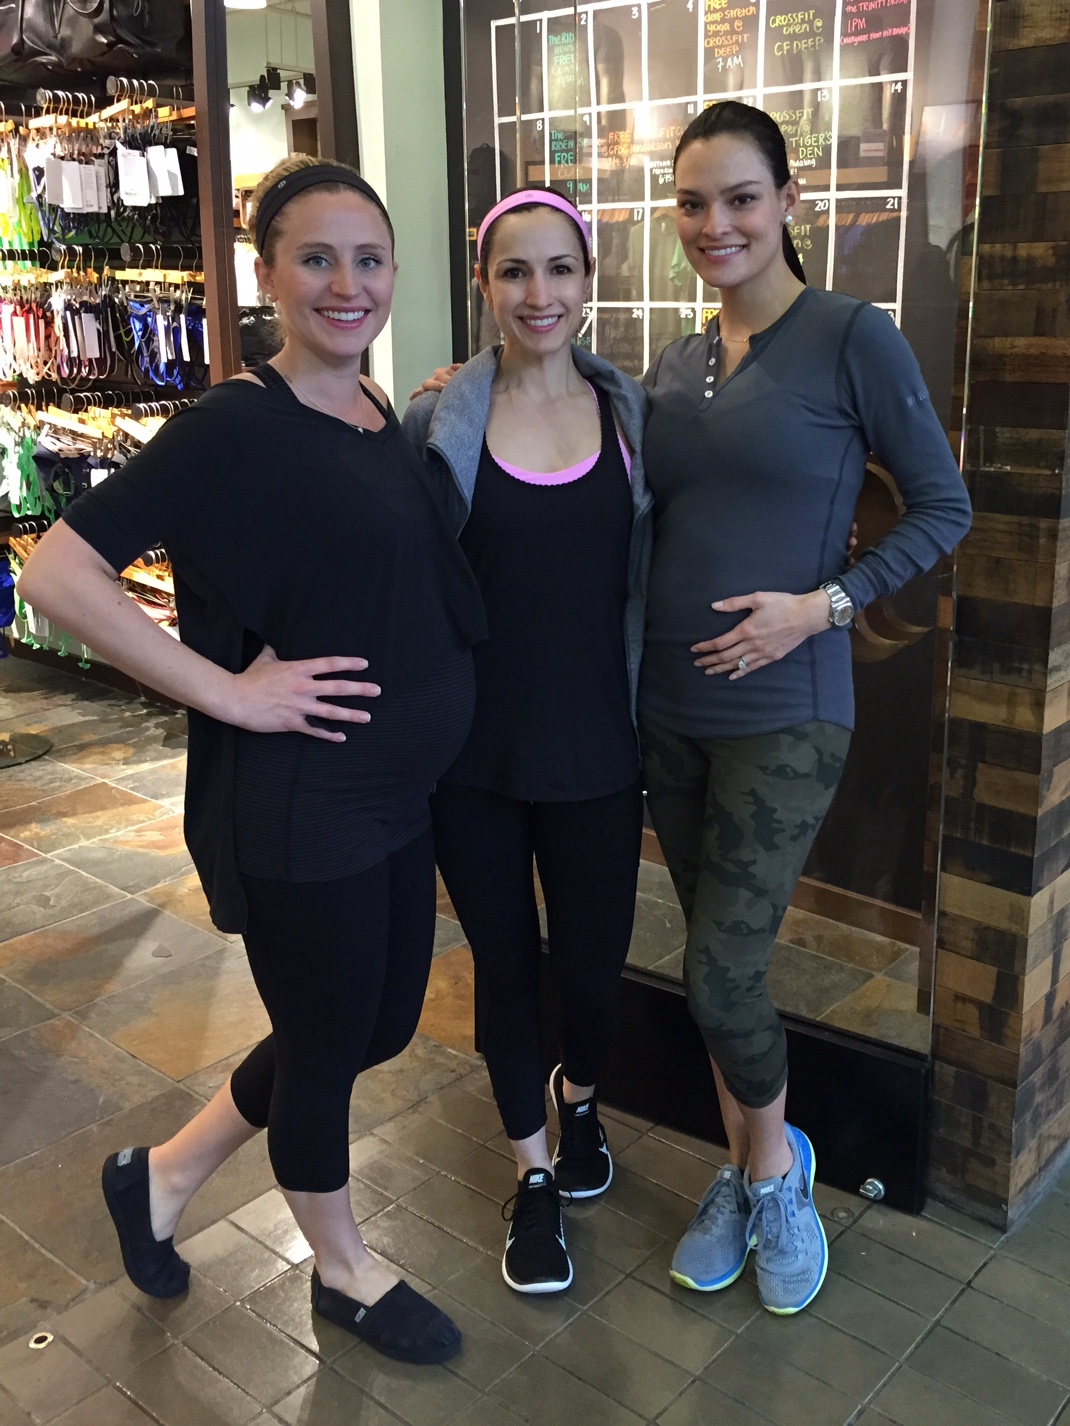 GIFT GUIDE: LULULEMON ACTIVE GIFTS FOR HER - Loubies and Lulu